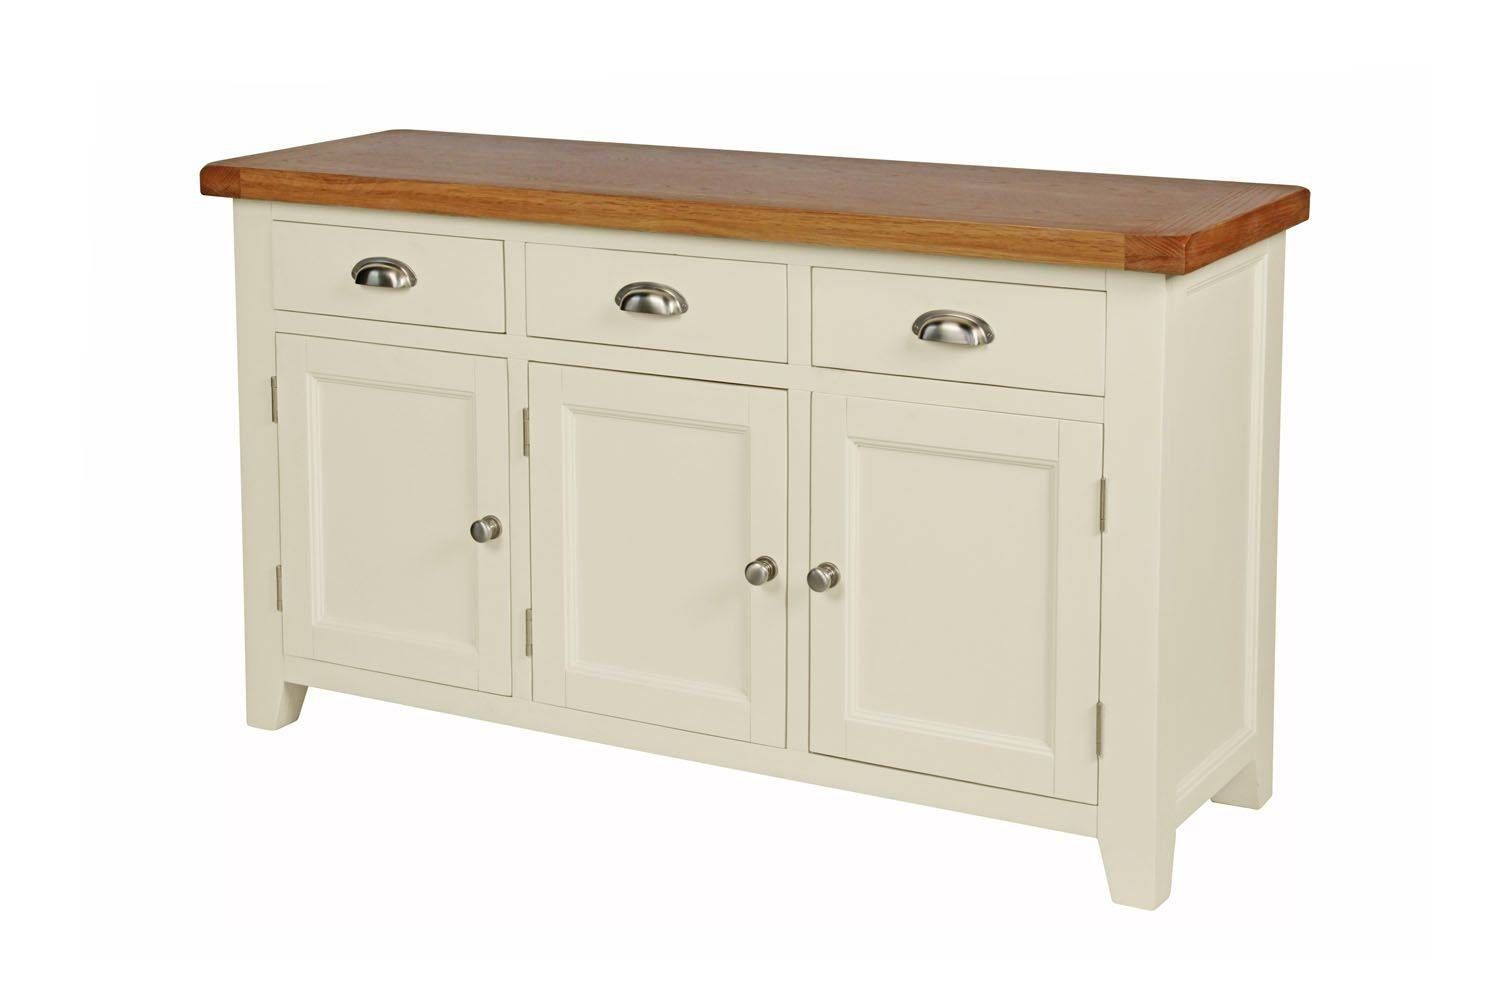 Country Cottage 140cm Cream Painted Large Oak Sideboard In Most Up To Date Cream And Oak Sideboards (View 3 of 15)